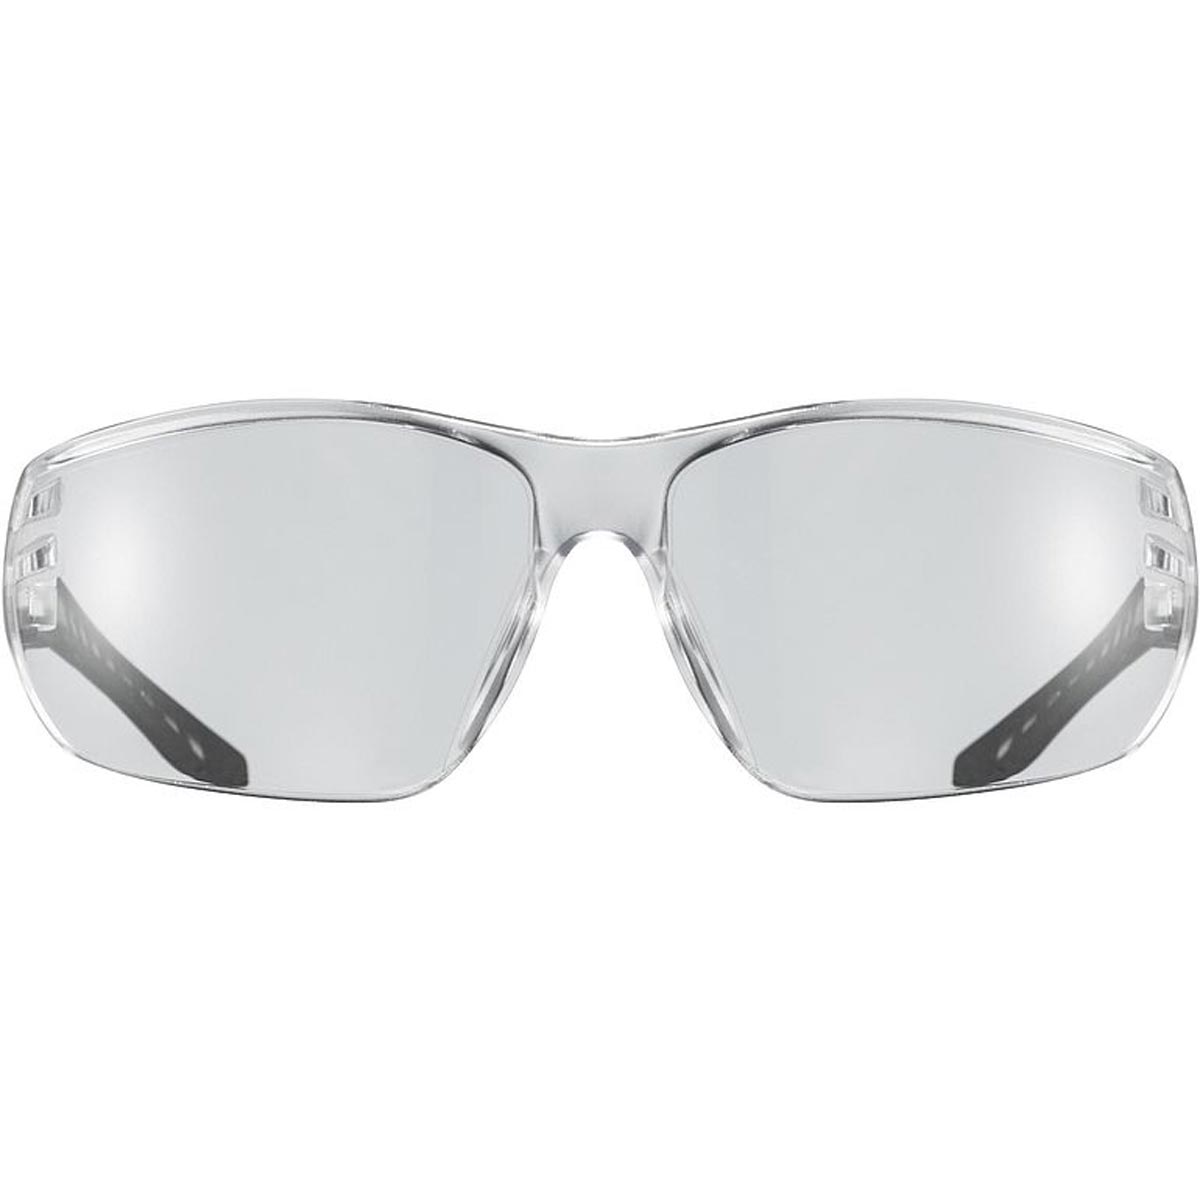 Uvex goggles Sportstyle 204 clear